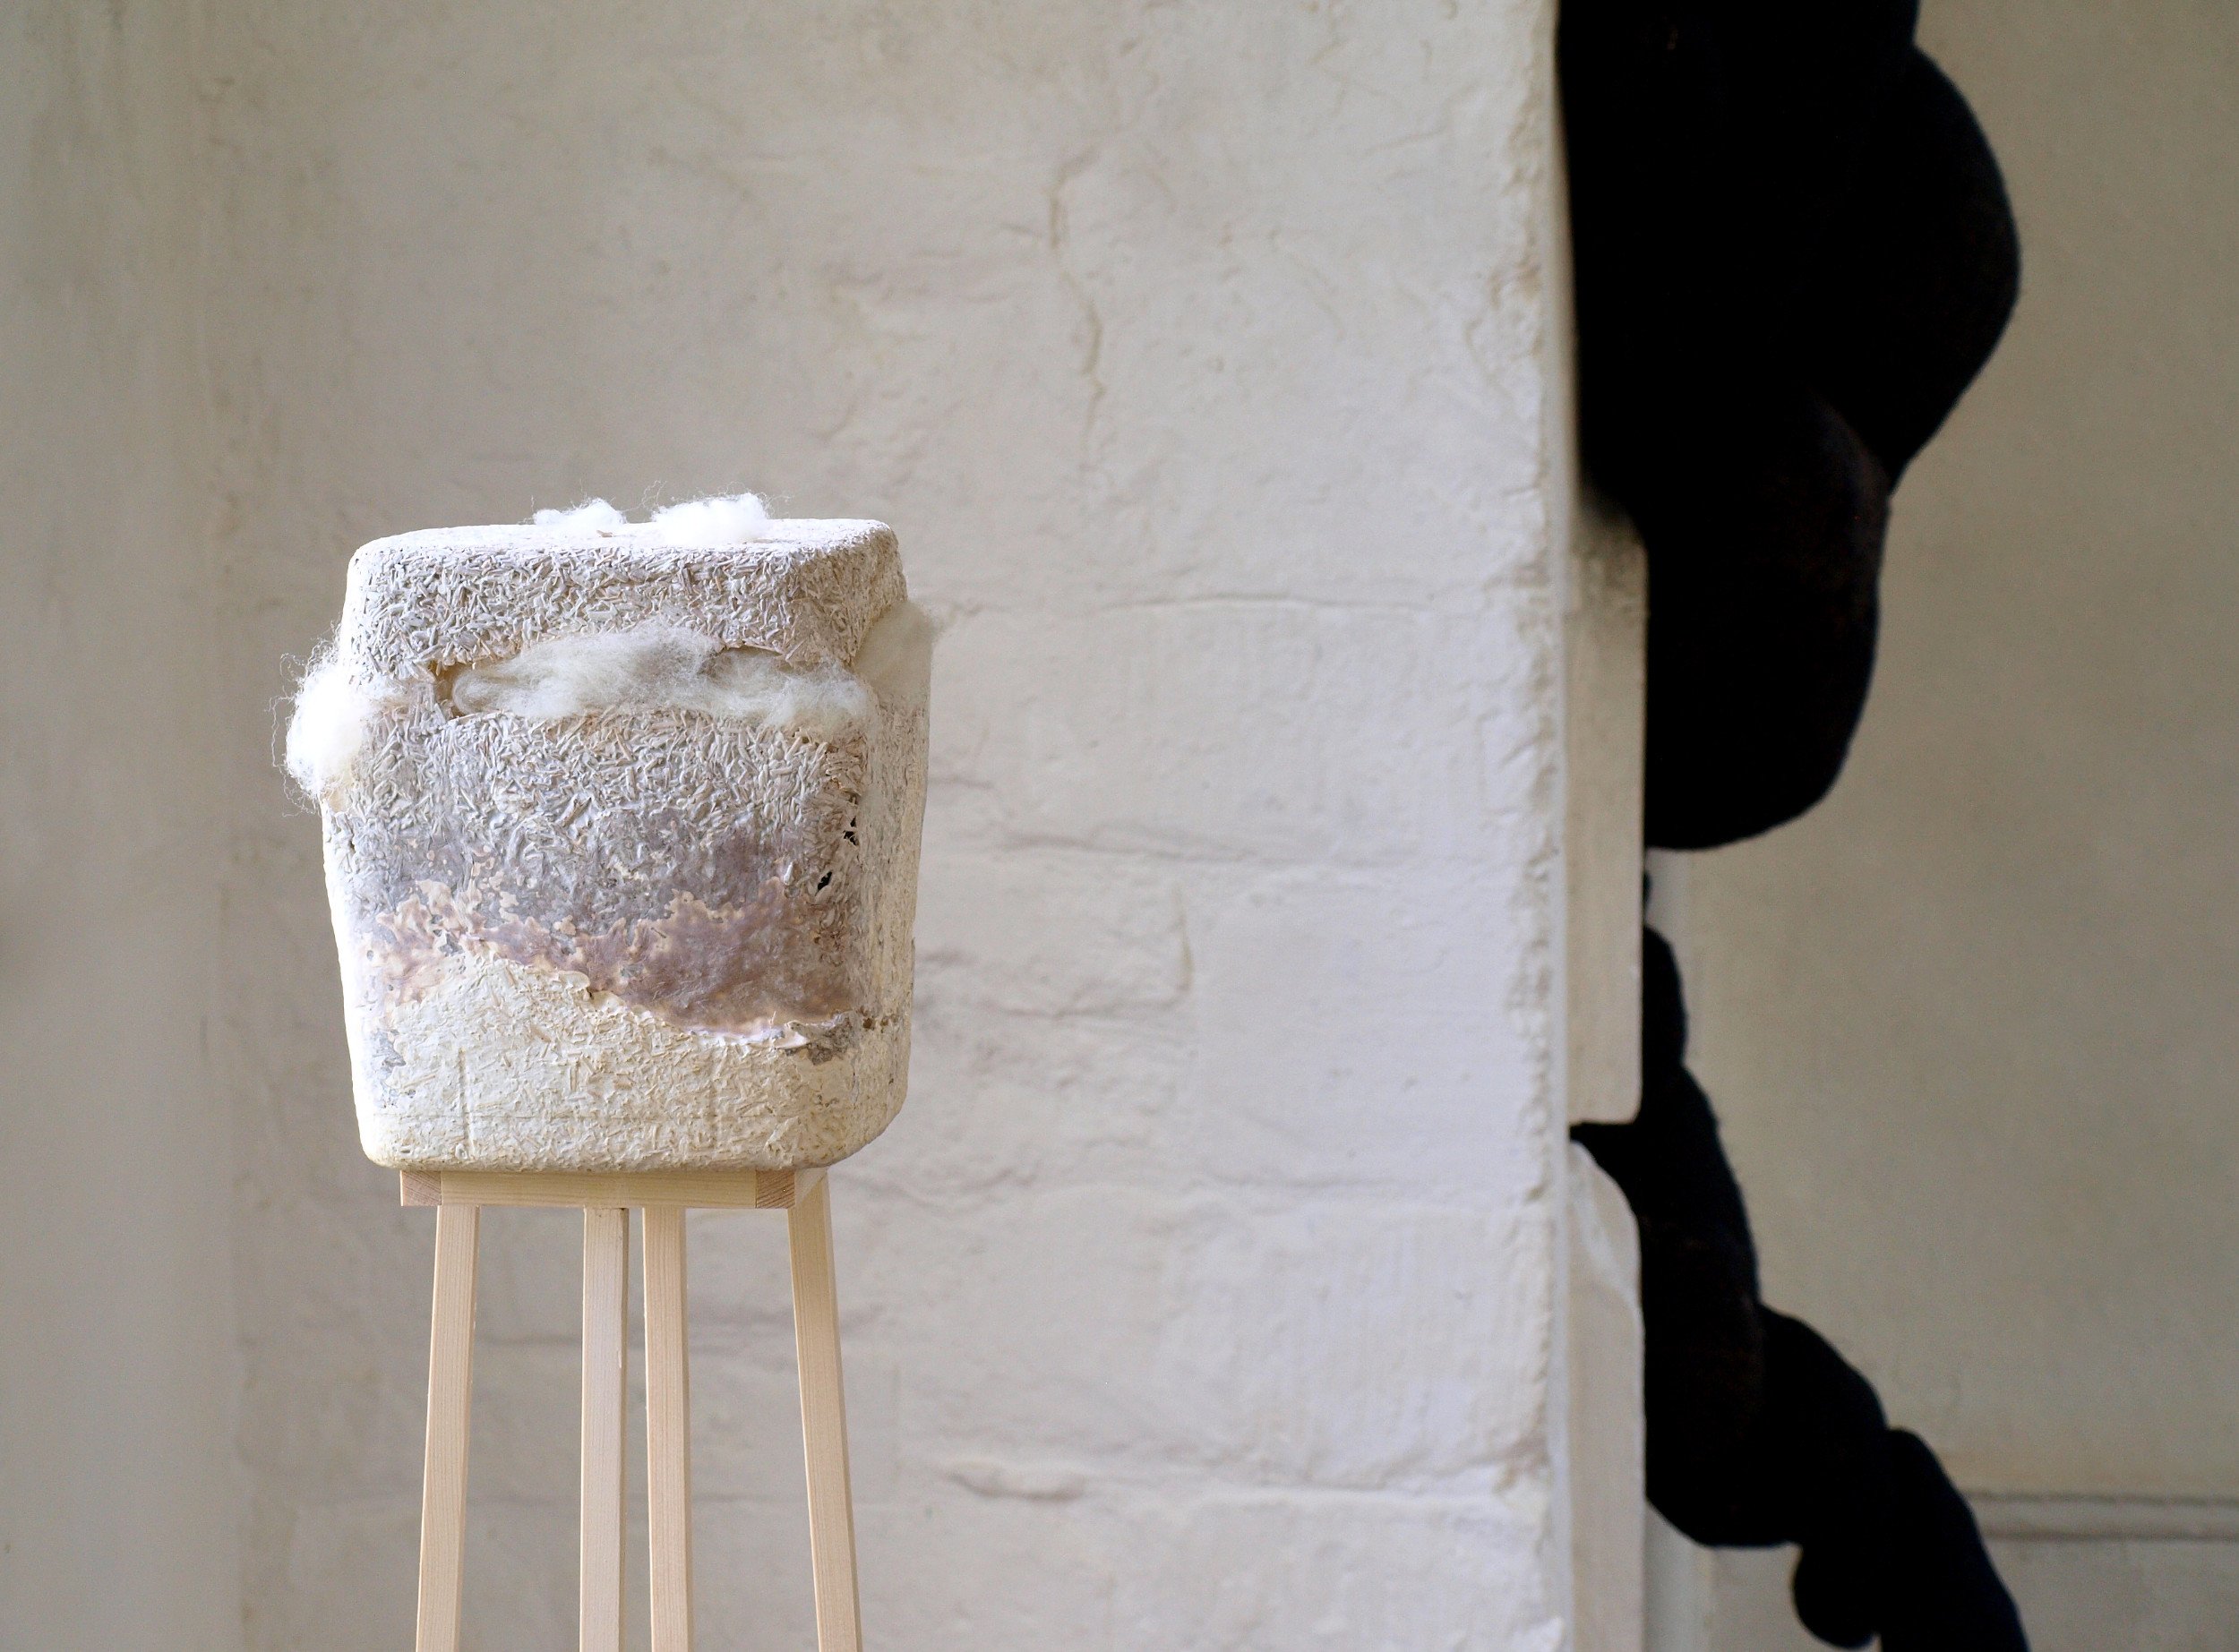  Kelly M O’Brien, Protective Nature. Cast mycelium, wool, wood. 160 x 30 x 30 cm ©2022 With Nicola Turner’s  Mortuary Chapel Site Response  Image: Kate McDonnell 